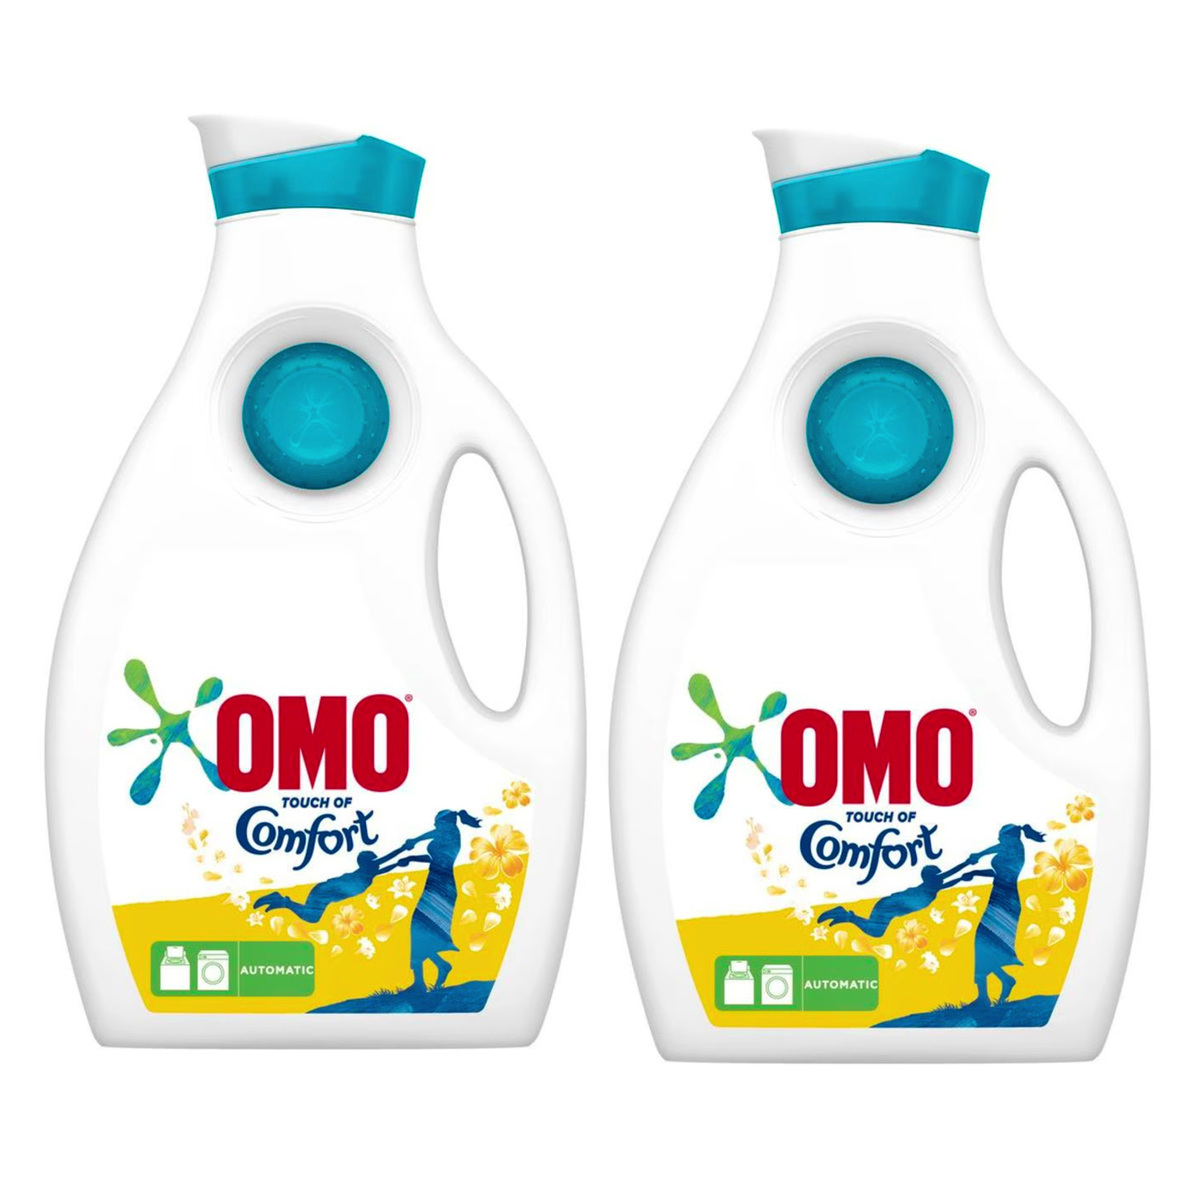 OMO Liquid Laundry Detergent With Touch Of Comfort Automatic 2 x 2 Litres